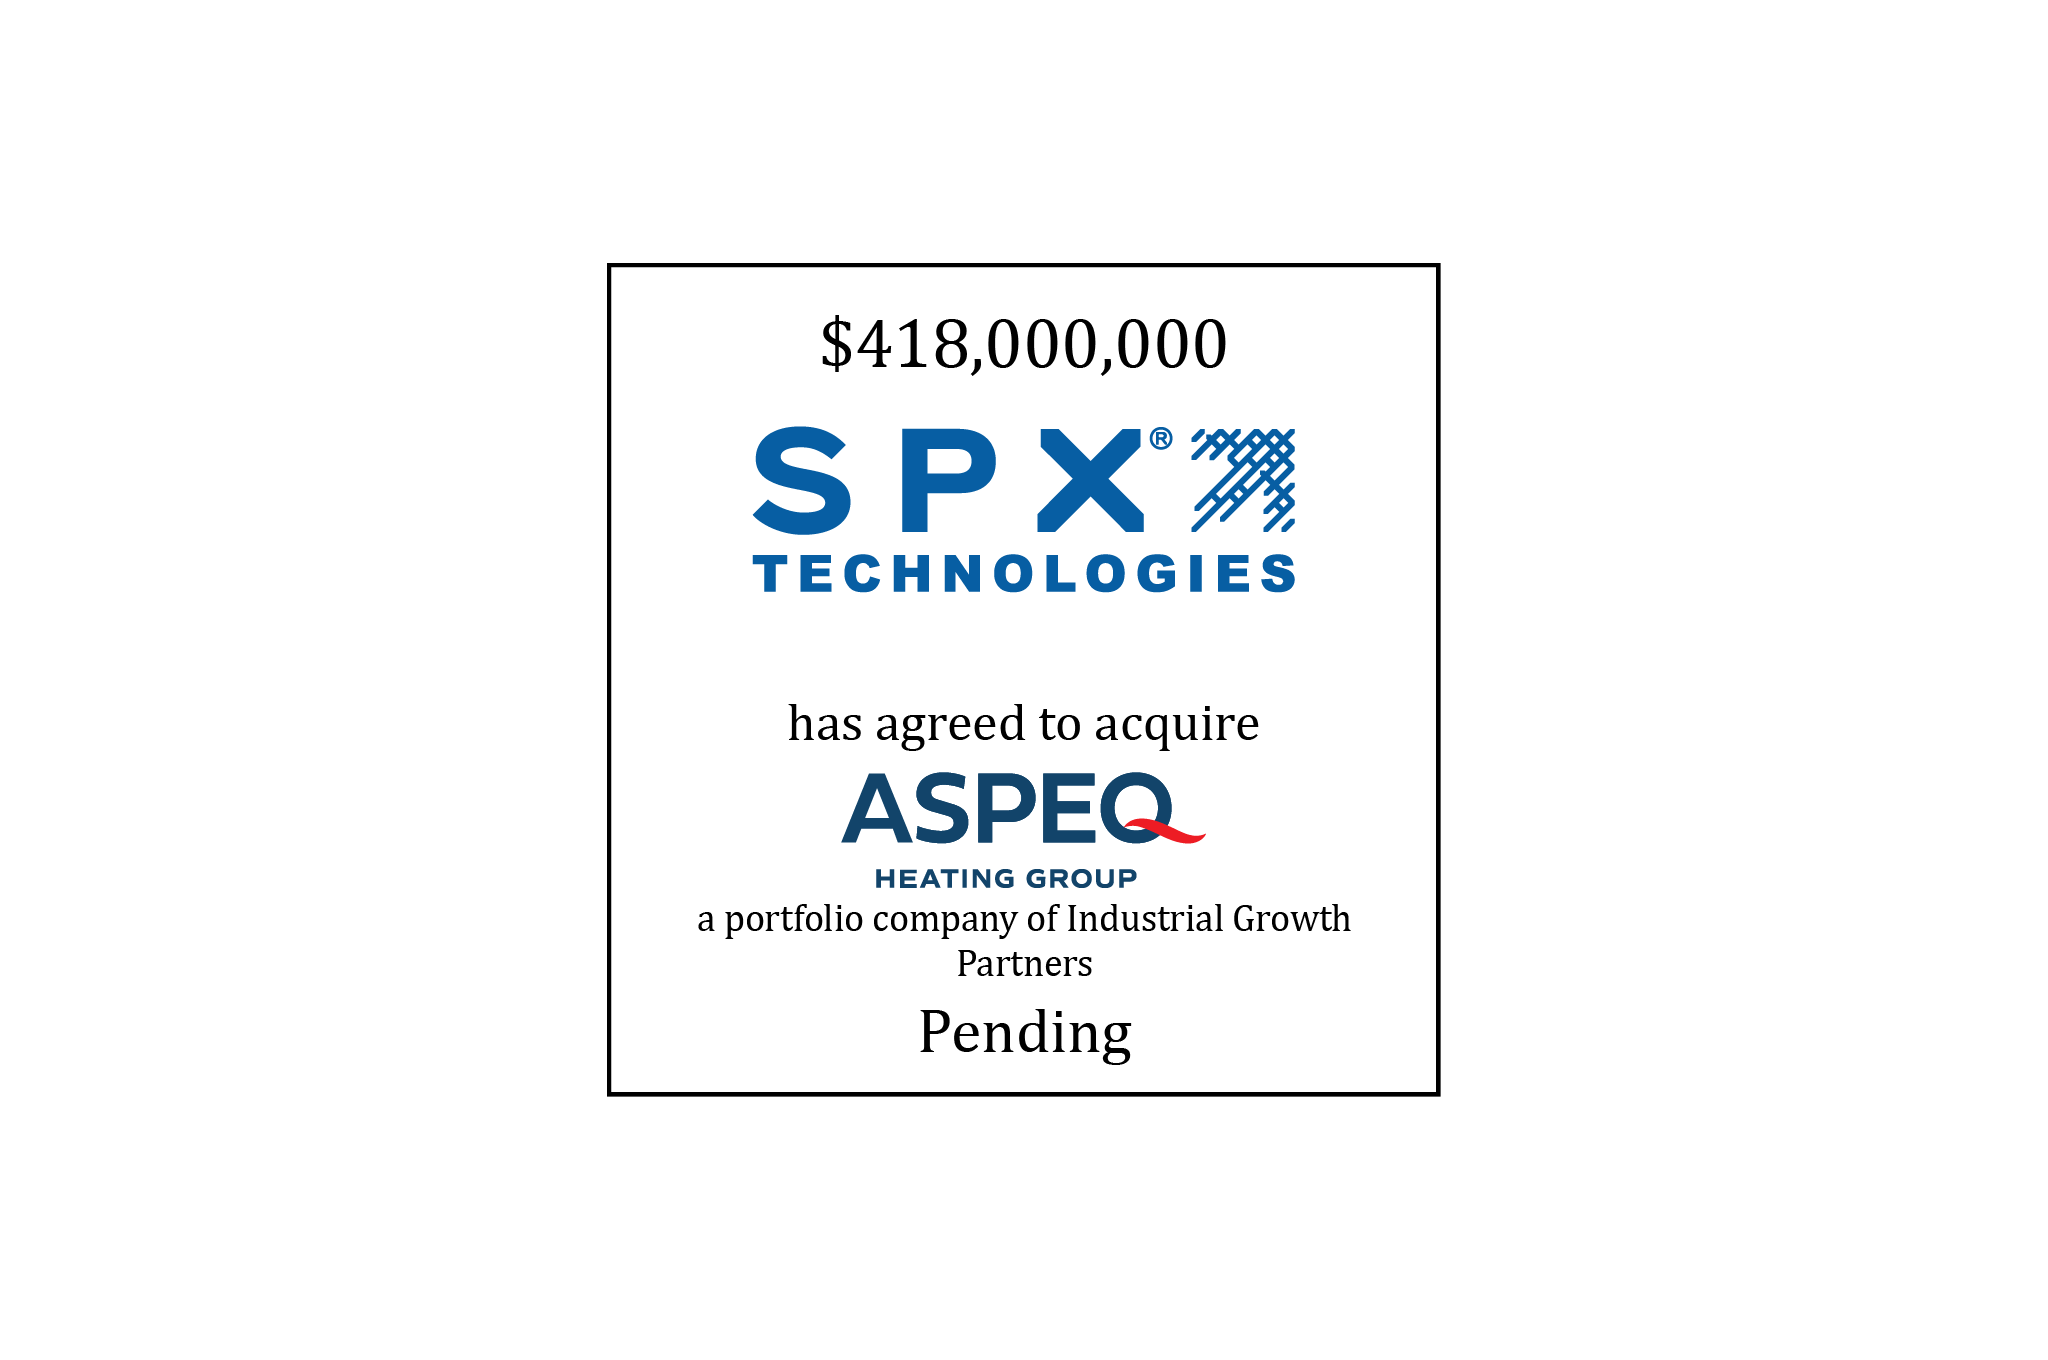 $418,000,000 | SPX Technologies (logo) has agreed to acquire ASPEQ Heating Group (logo), a portfolio company of Industrial Growth Partners | Pending